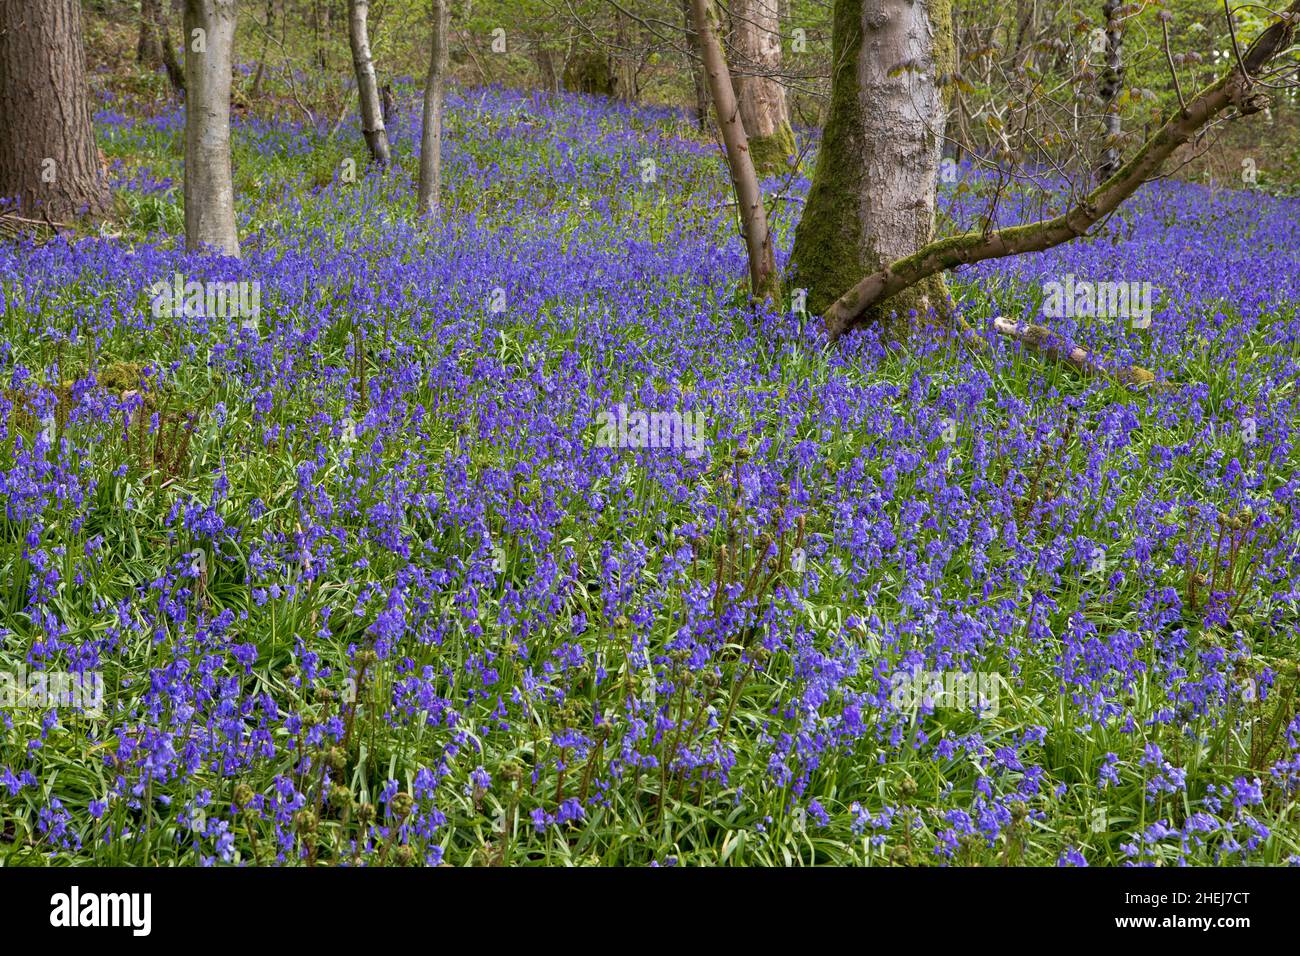 Bluebells in a UK woodland in springtime. UK wildflowers blooming in the trees. Ribble valley landscape Stock Photo